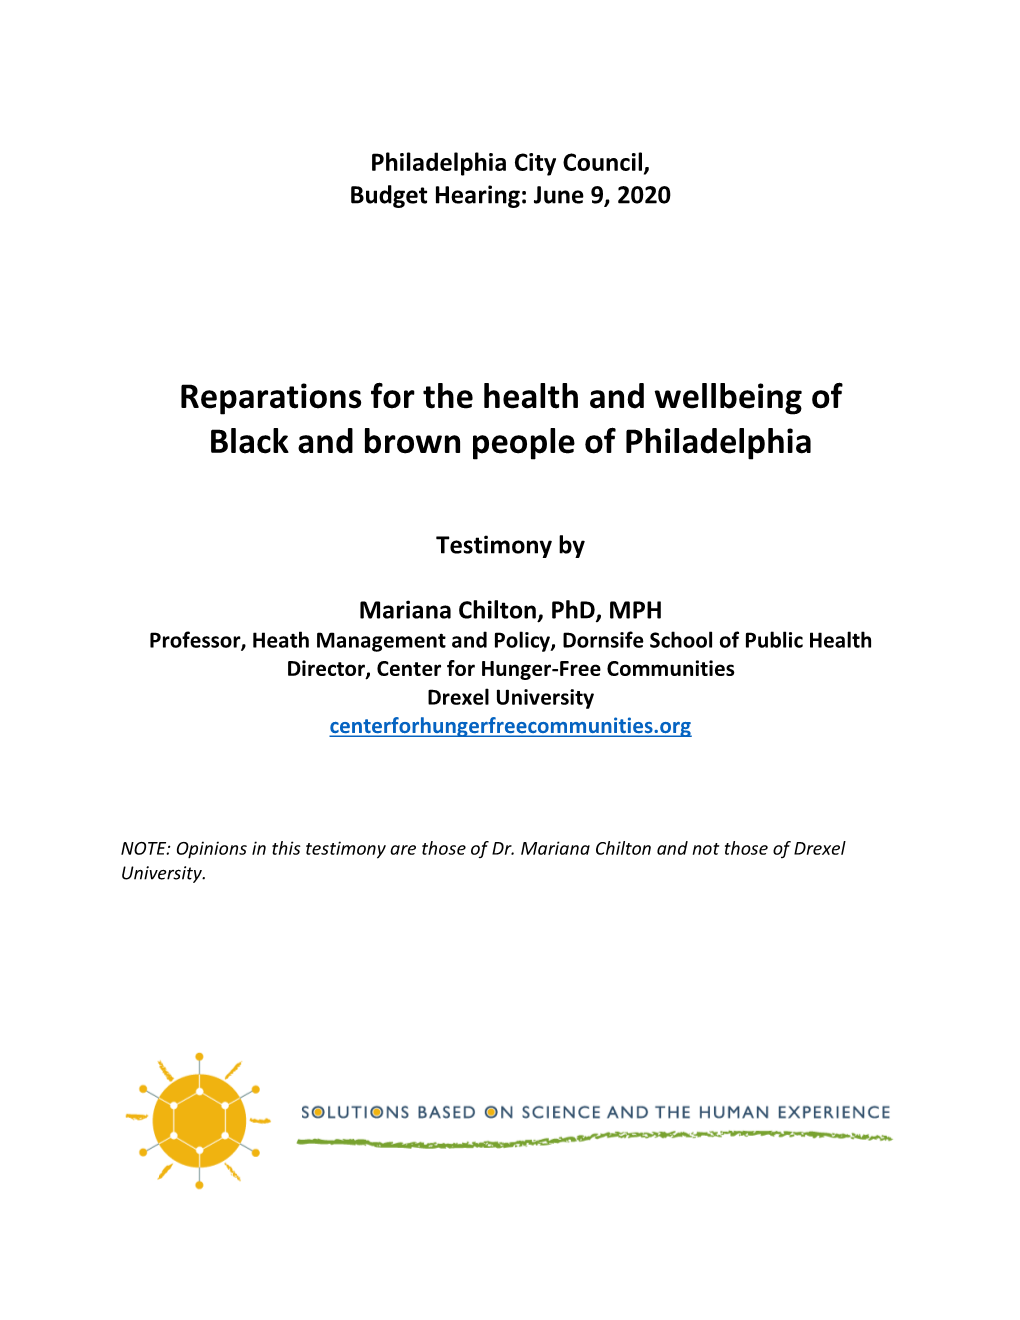 Reparations for the Health and Wellbeing of Black and Brown People of Philadelphia